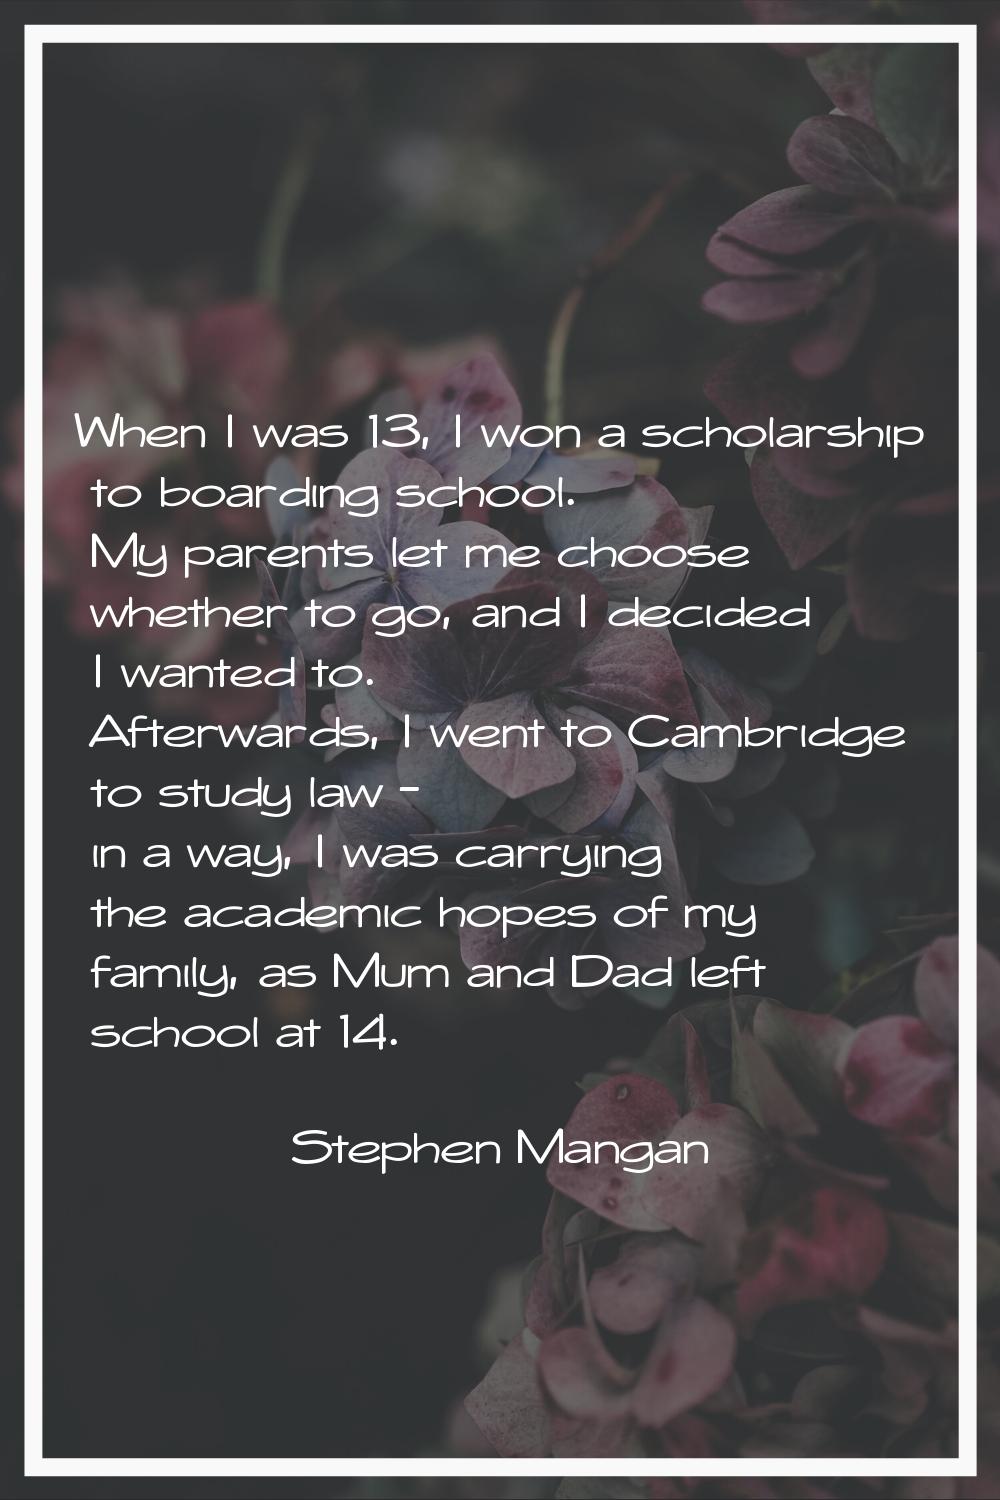 When I was 13, I won a scholarship to boarding school. My parents let me choose whether to go, and 